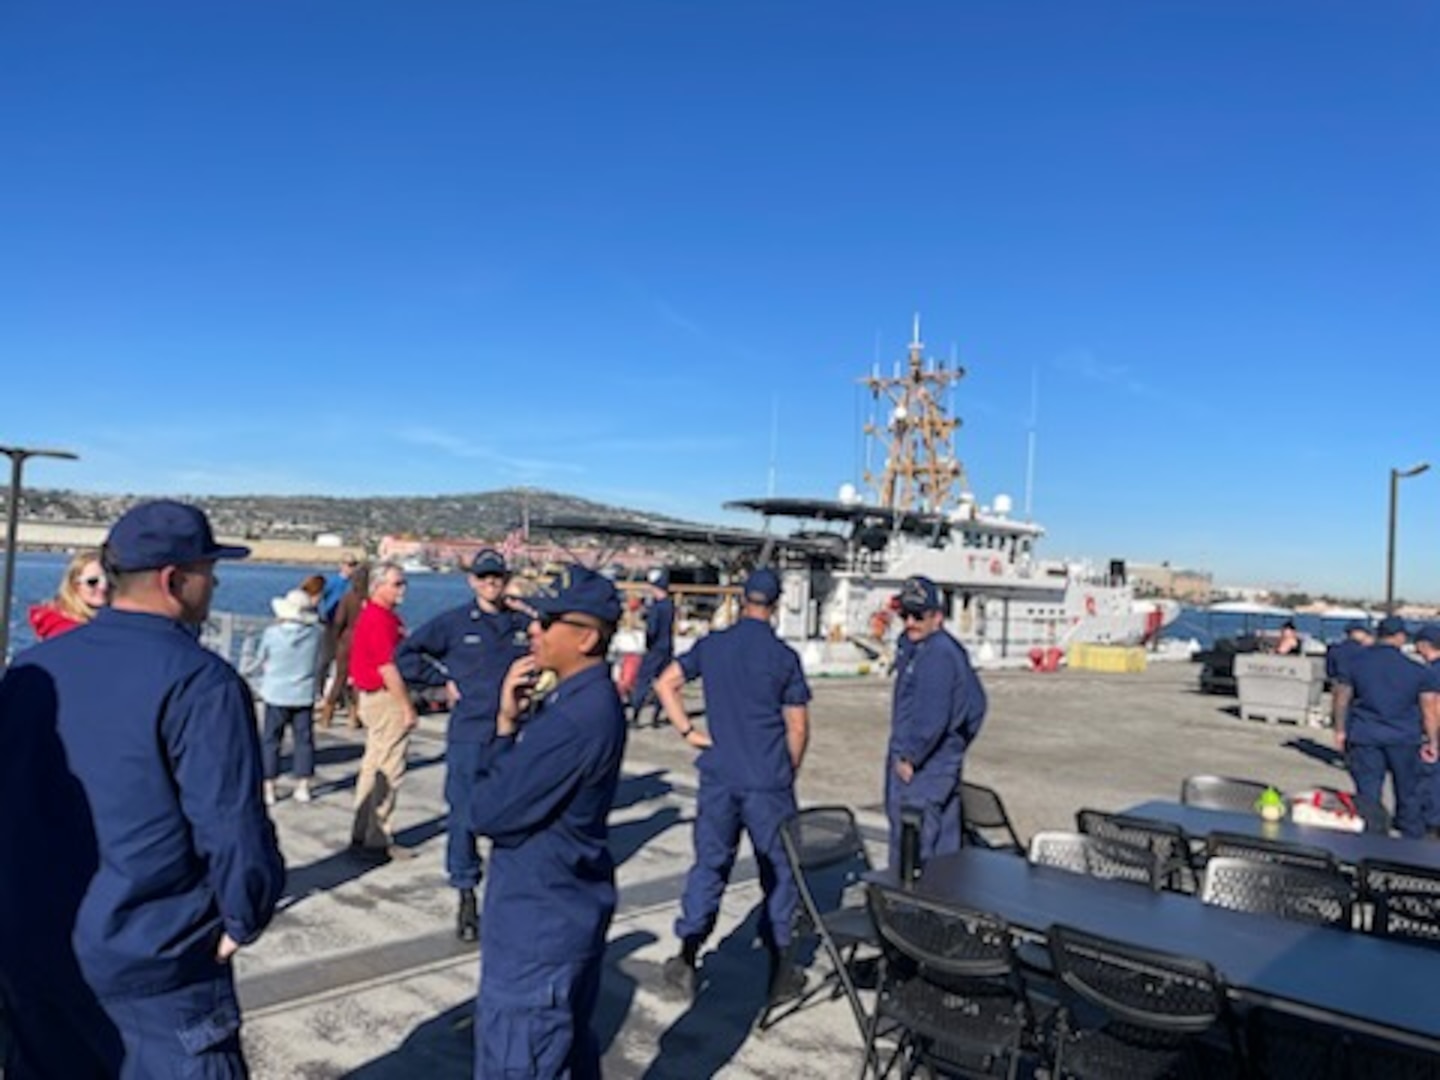 The U.S. Coast Guard Cutter Terrell Horne and crew returned to their home port in Los Angeles/Long Beach Tuesday after a 52-day patrol across the Eastern Pacific. 



The crew of the Terrell Horne deployed in support of multiple missions, including Operations Green Flash, Albatross, Martillo, and Southern Shield, within the 11th Coast Guard District's area of responsibility. During the patrol, Terrell Horne's crew conducted a range of missions encompassing law enforcement, counter-drug operations, illegal, unreported, and unregulated fishing enforcement, and search and rescue operations.